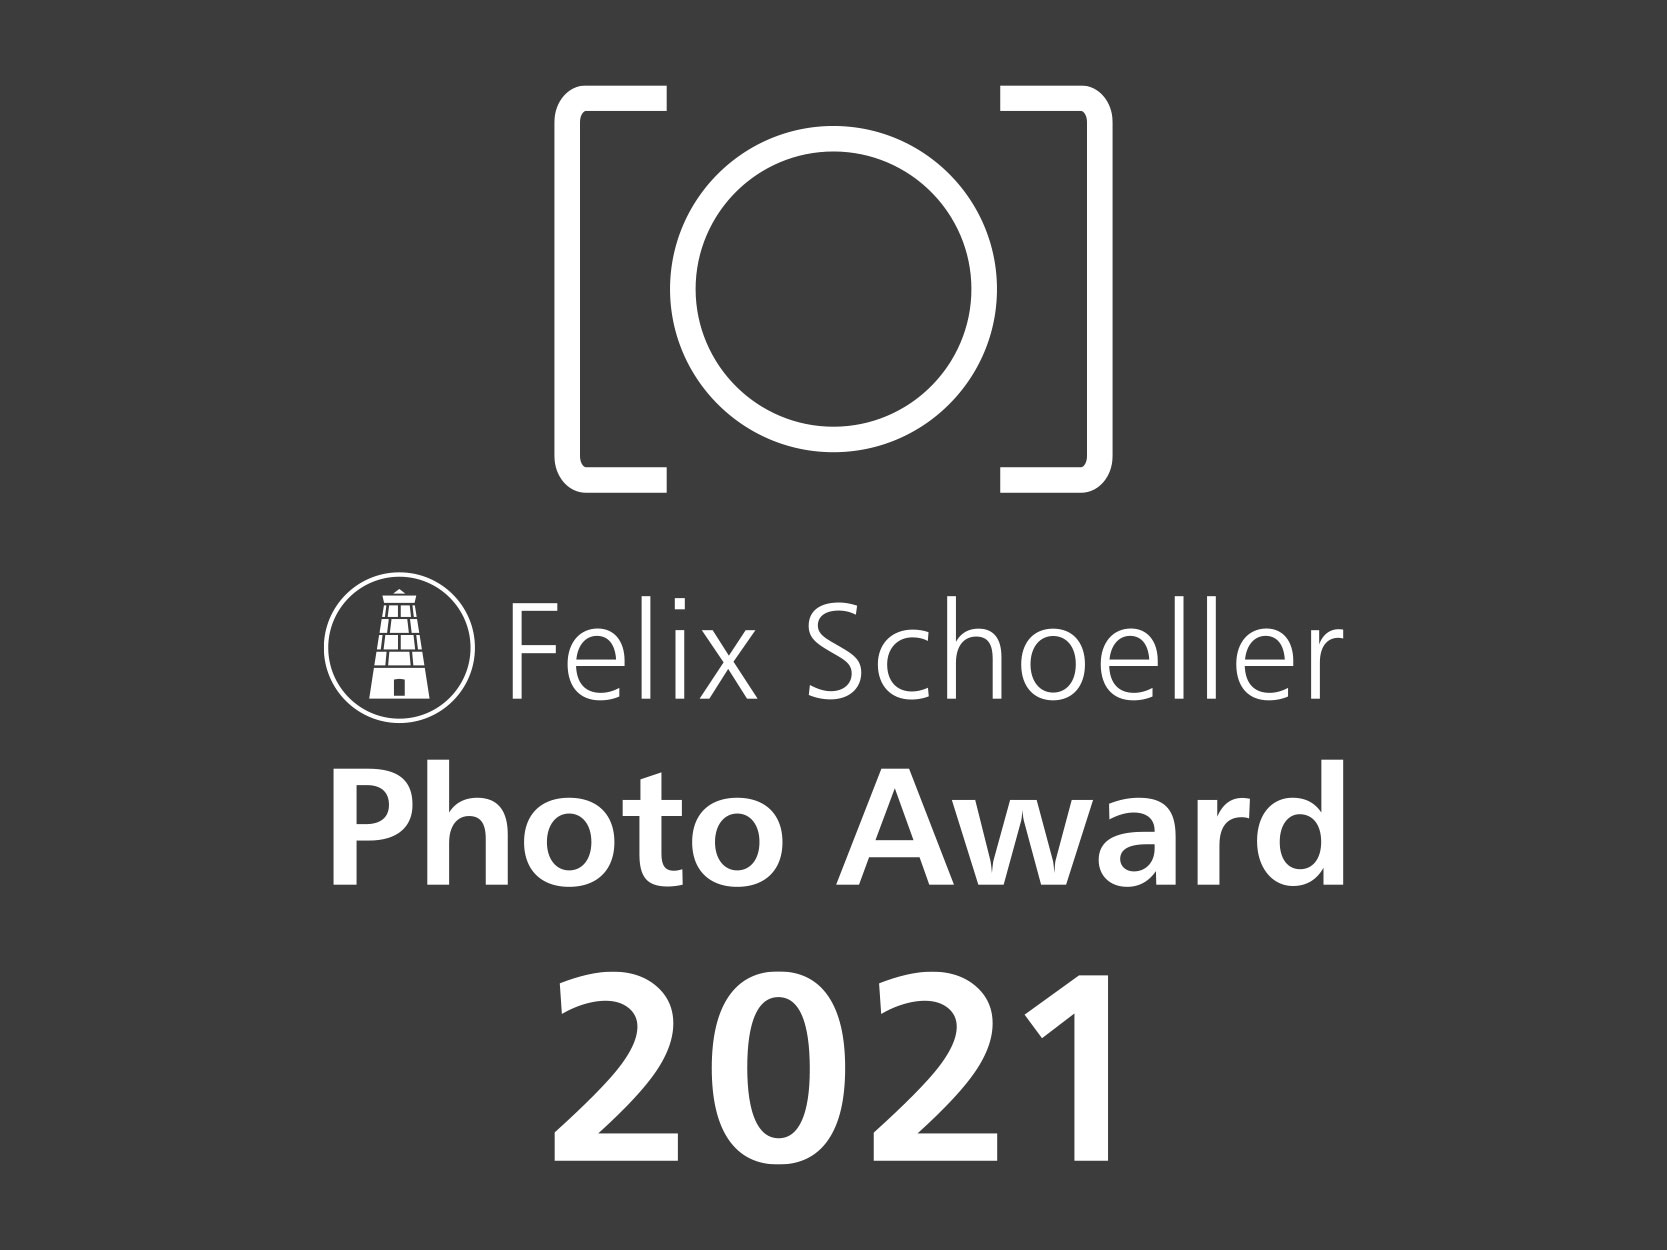 Felix Schoeller Photo Award: Submission period begins on 1 January 2021